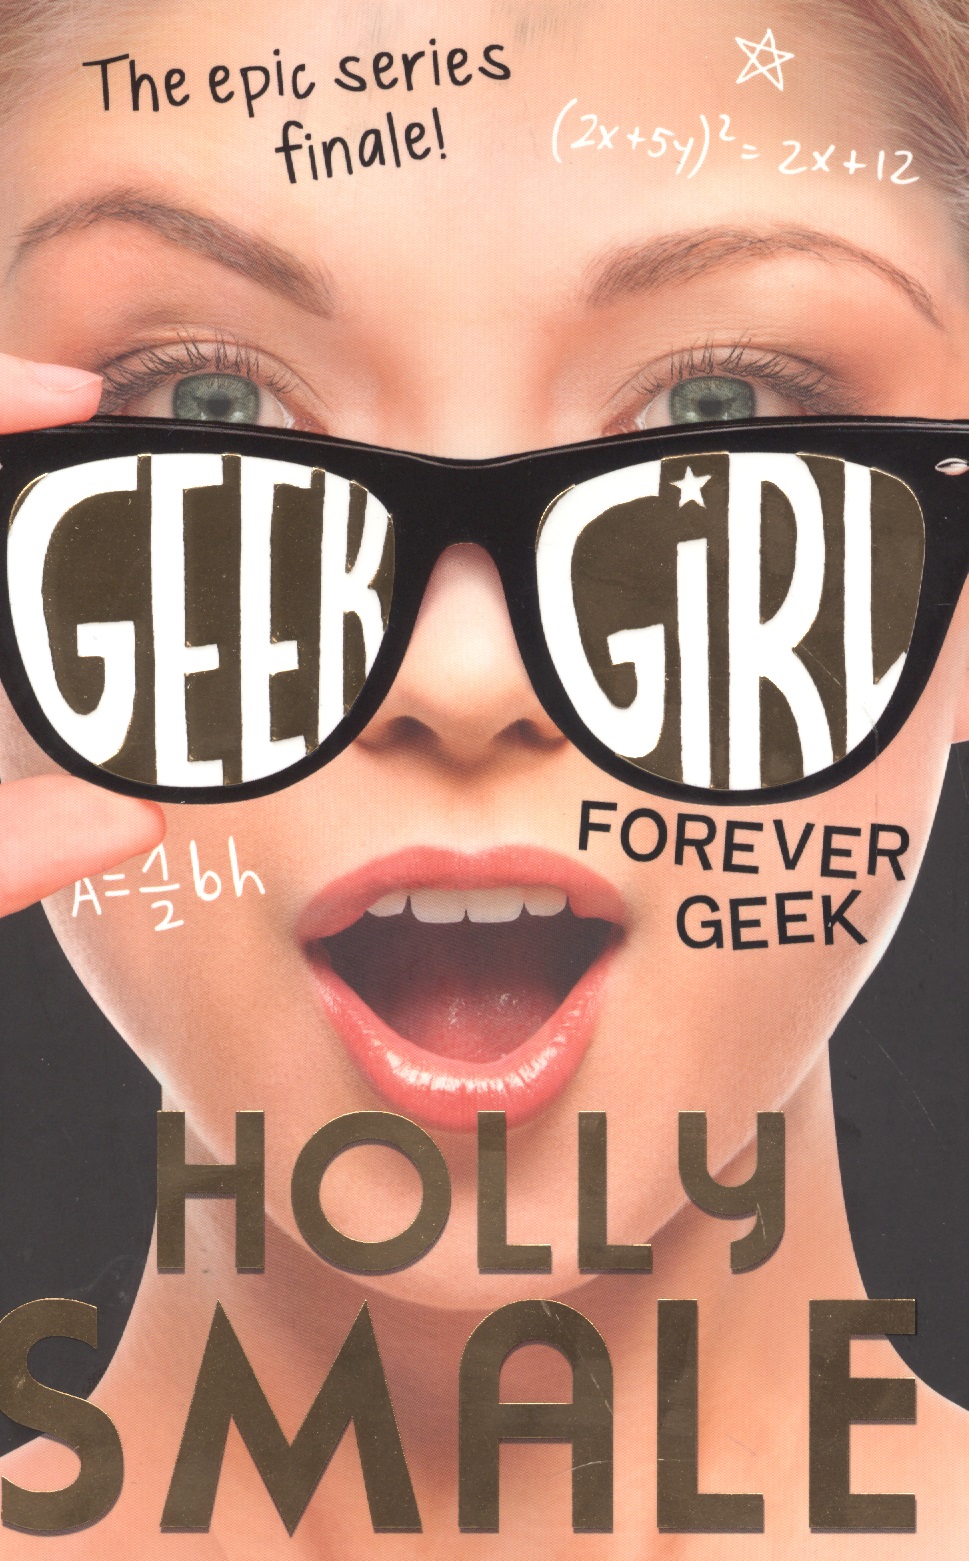 Smale Holly Forever Geek (Geek Girl, Book 6) (м) Smale smale holly picture perfect